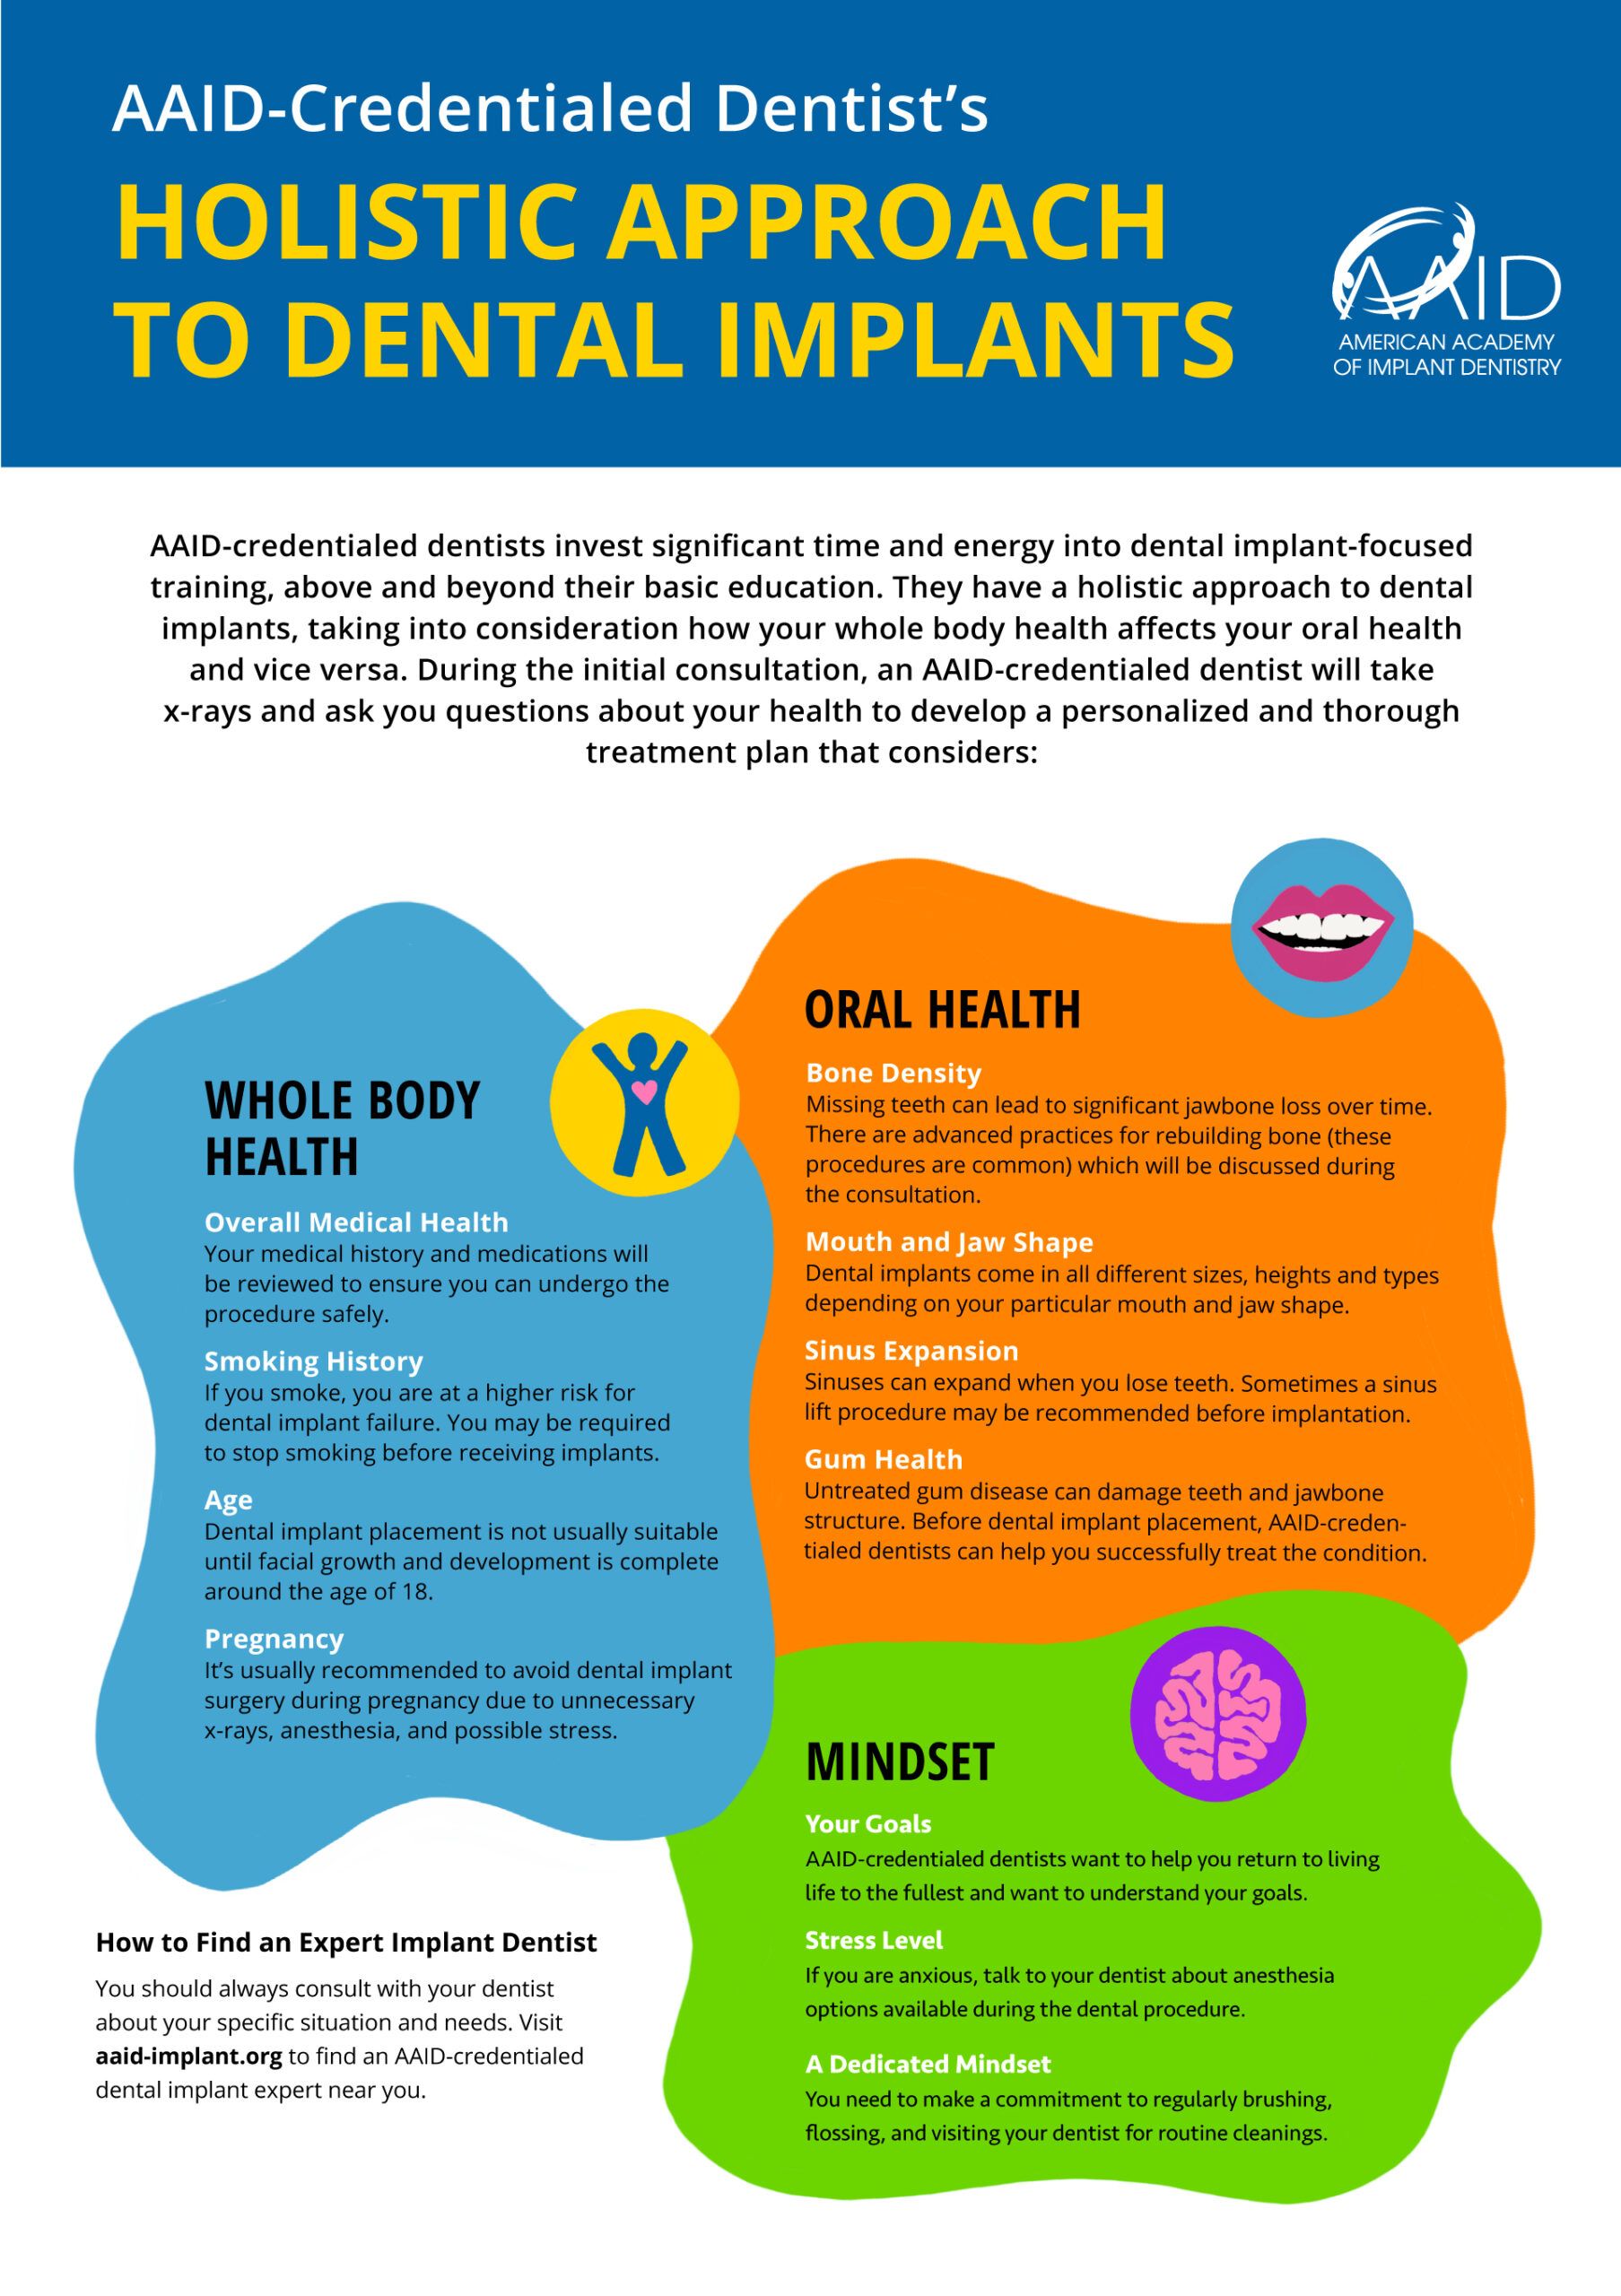 Holistic approach to dental implants